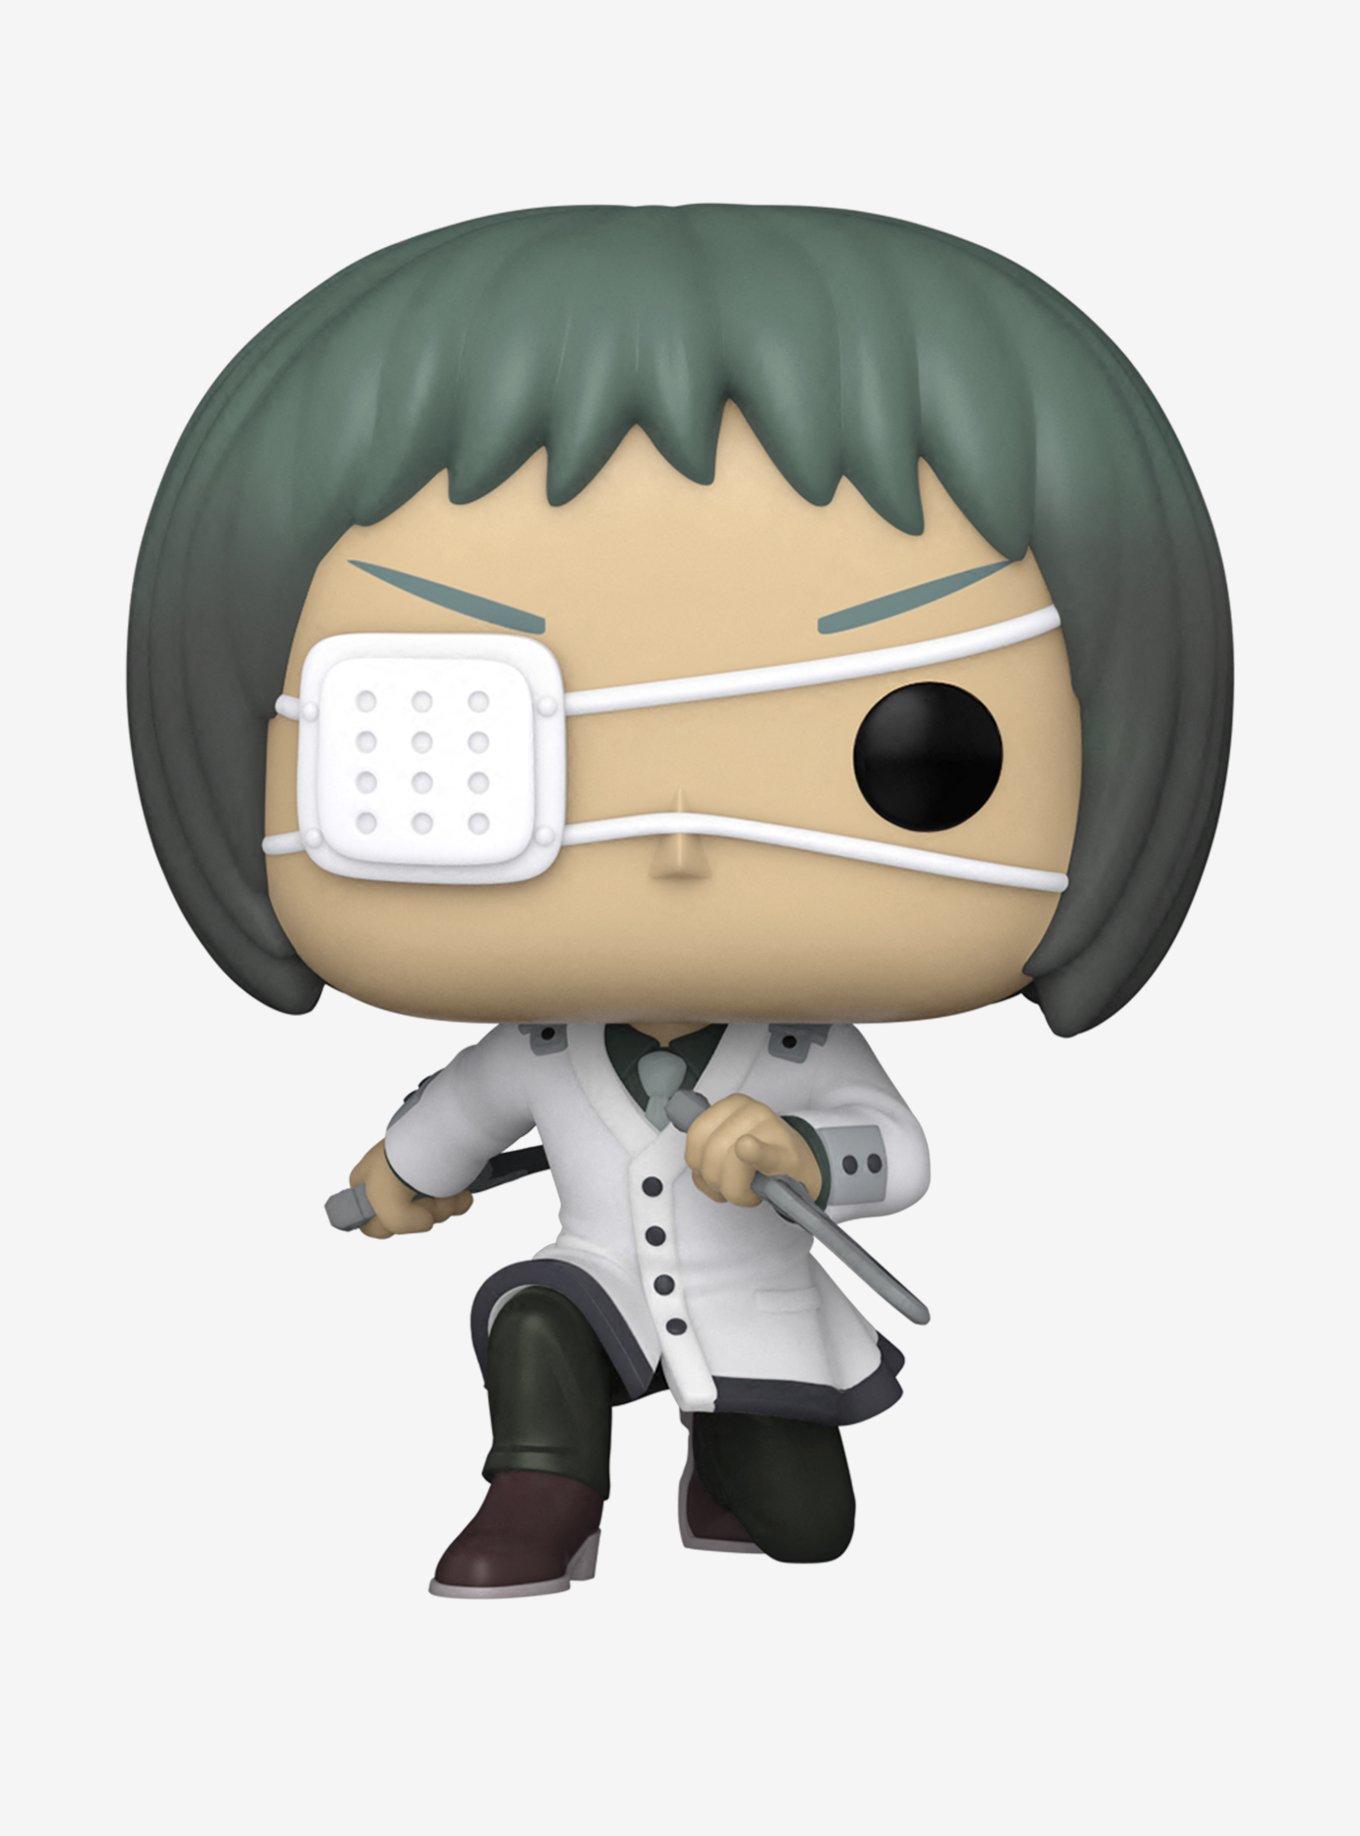 Tokyo Ghoul Funko Pops! Check out our online inventory! Over 50 funko pops  !